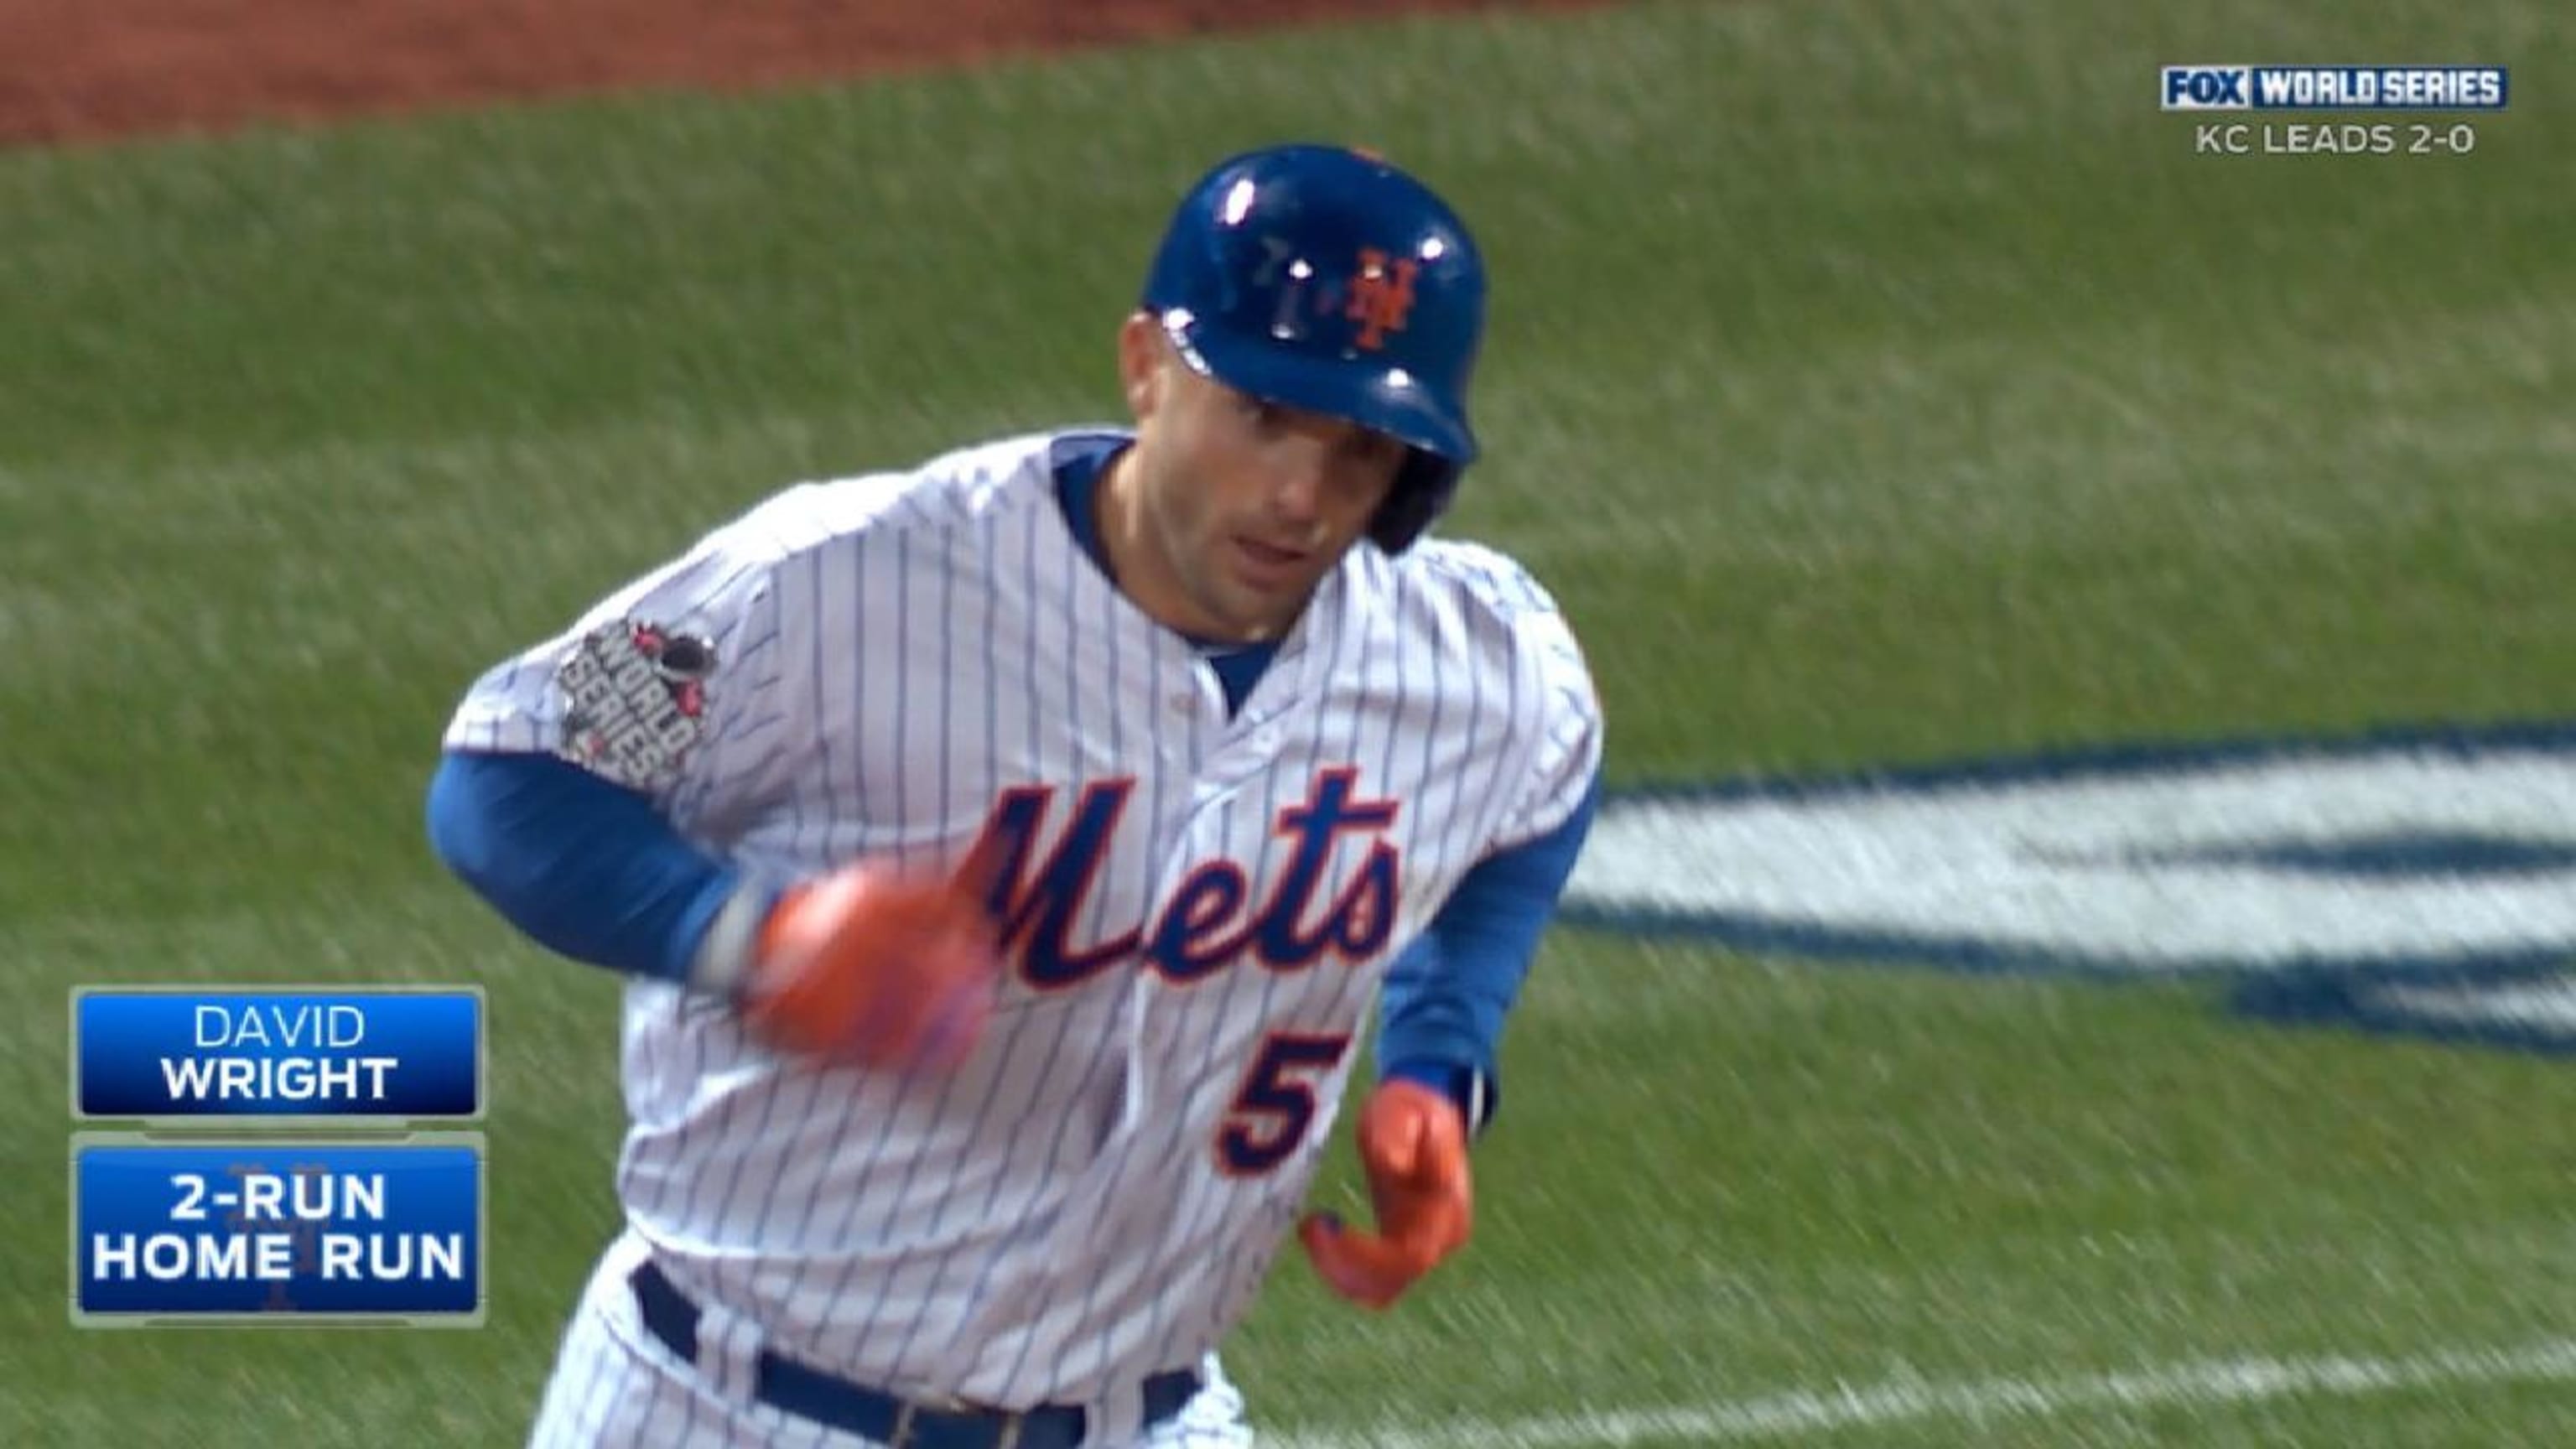 David Wright's top moments